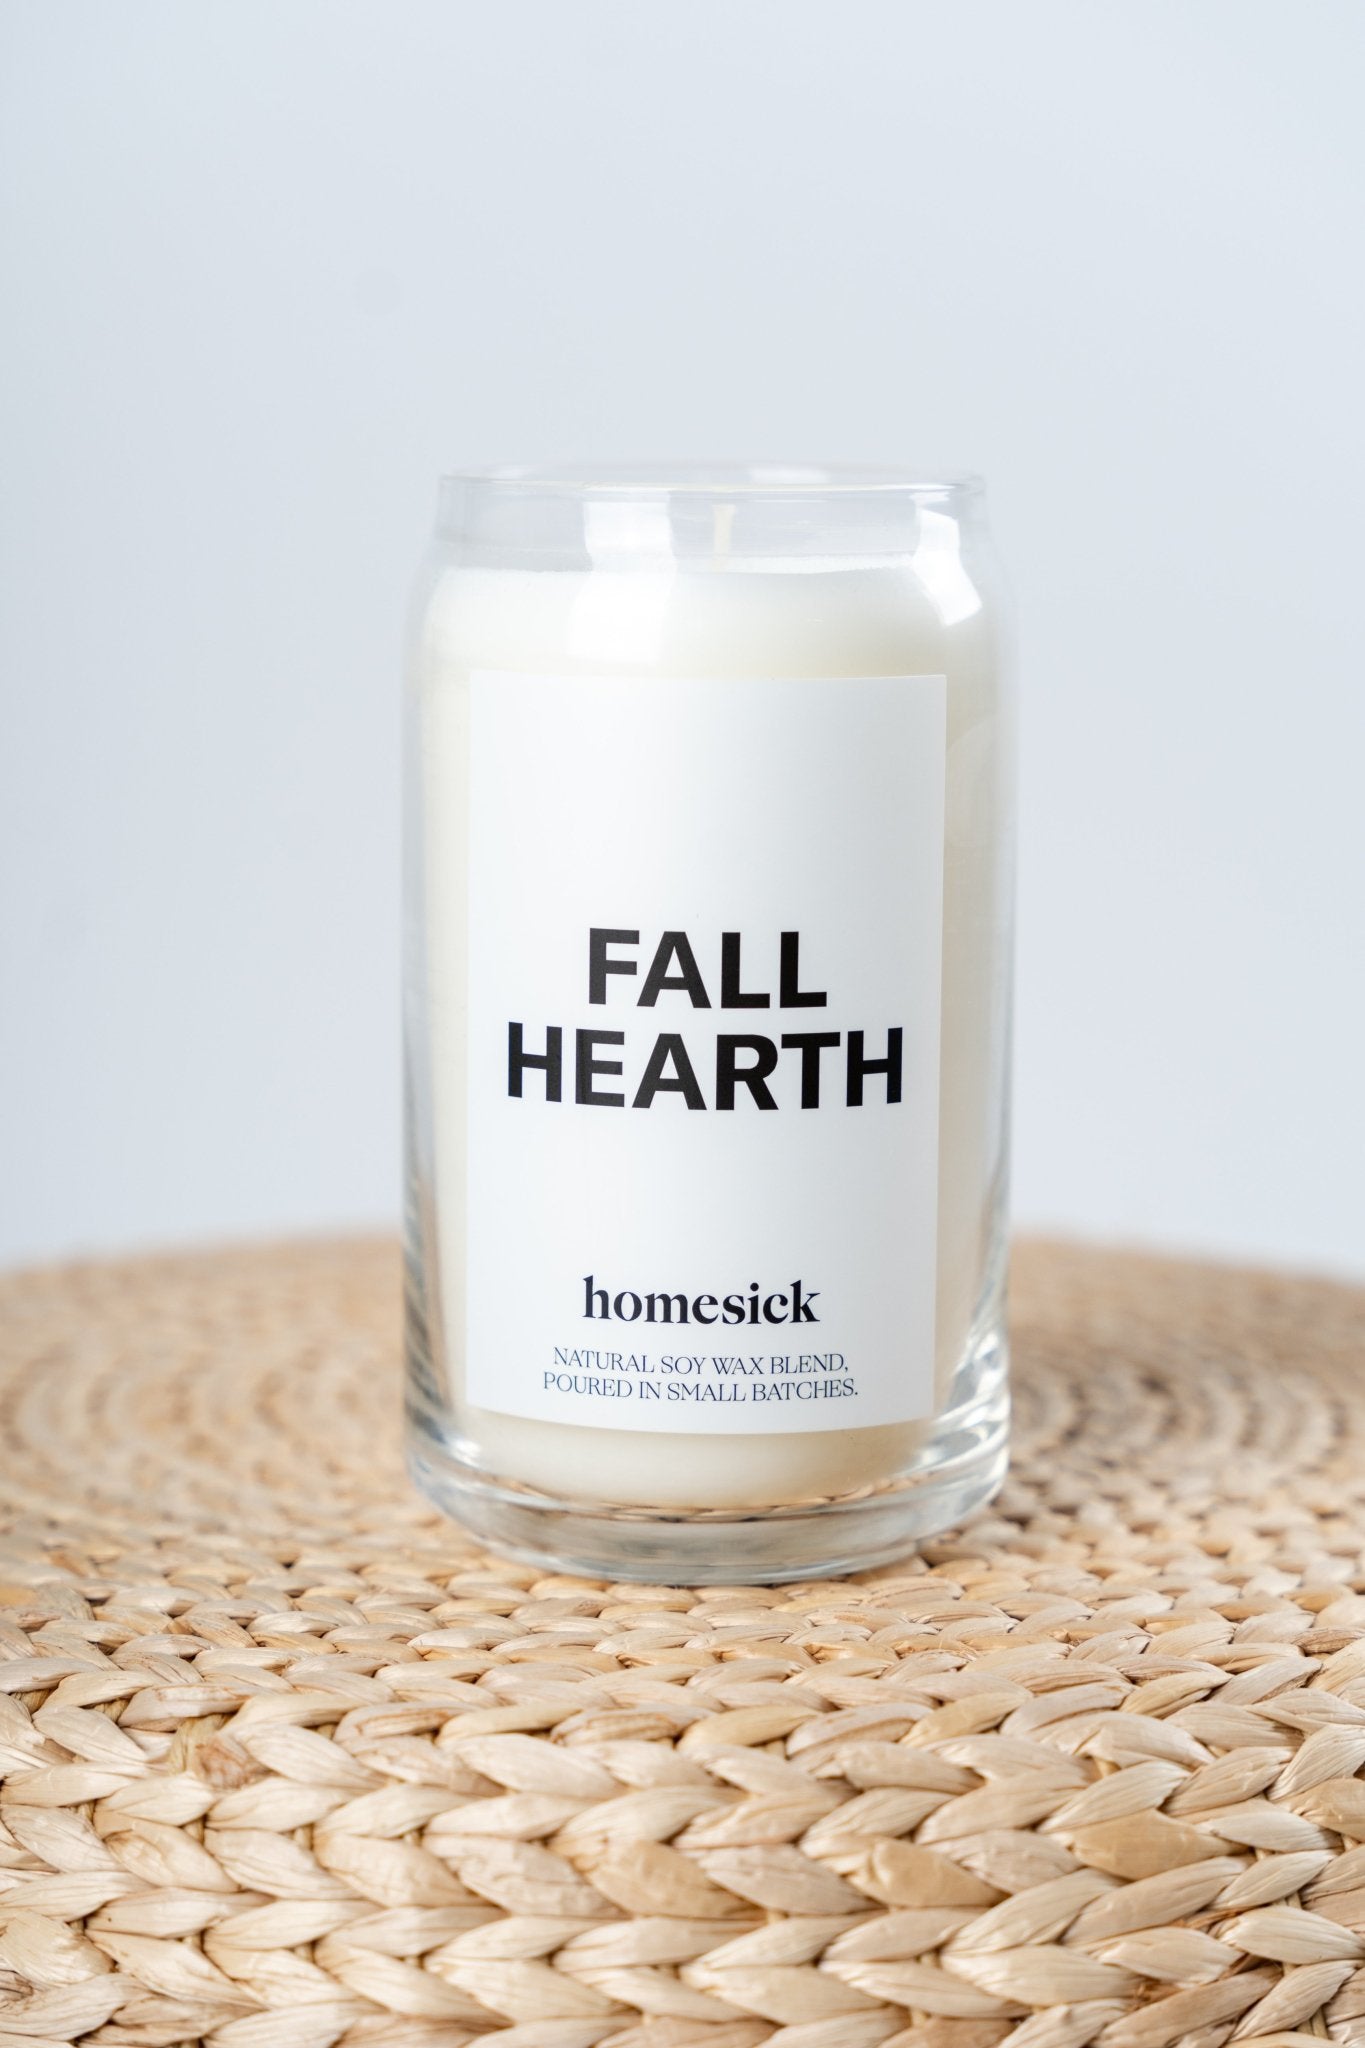 Homesick Fall hearth candle - Trendy Candles and Scents at Lush Fashion Lounge Boutique in Oklahoma City